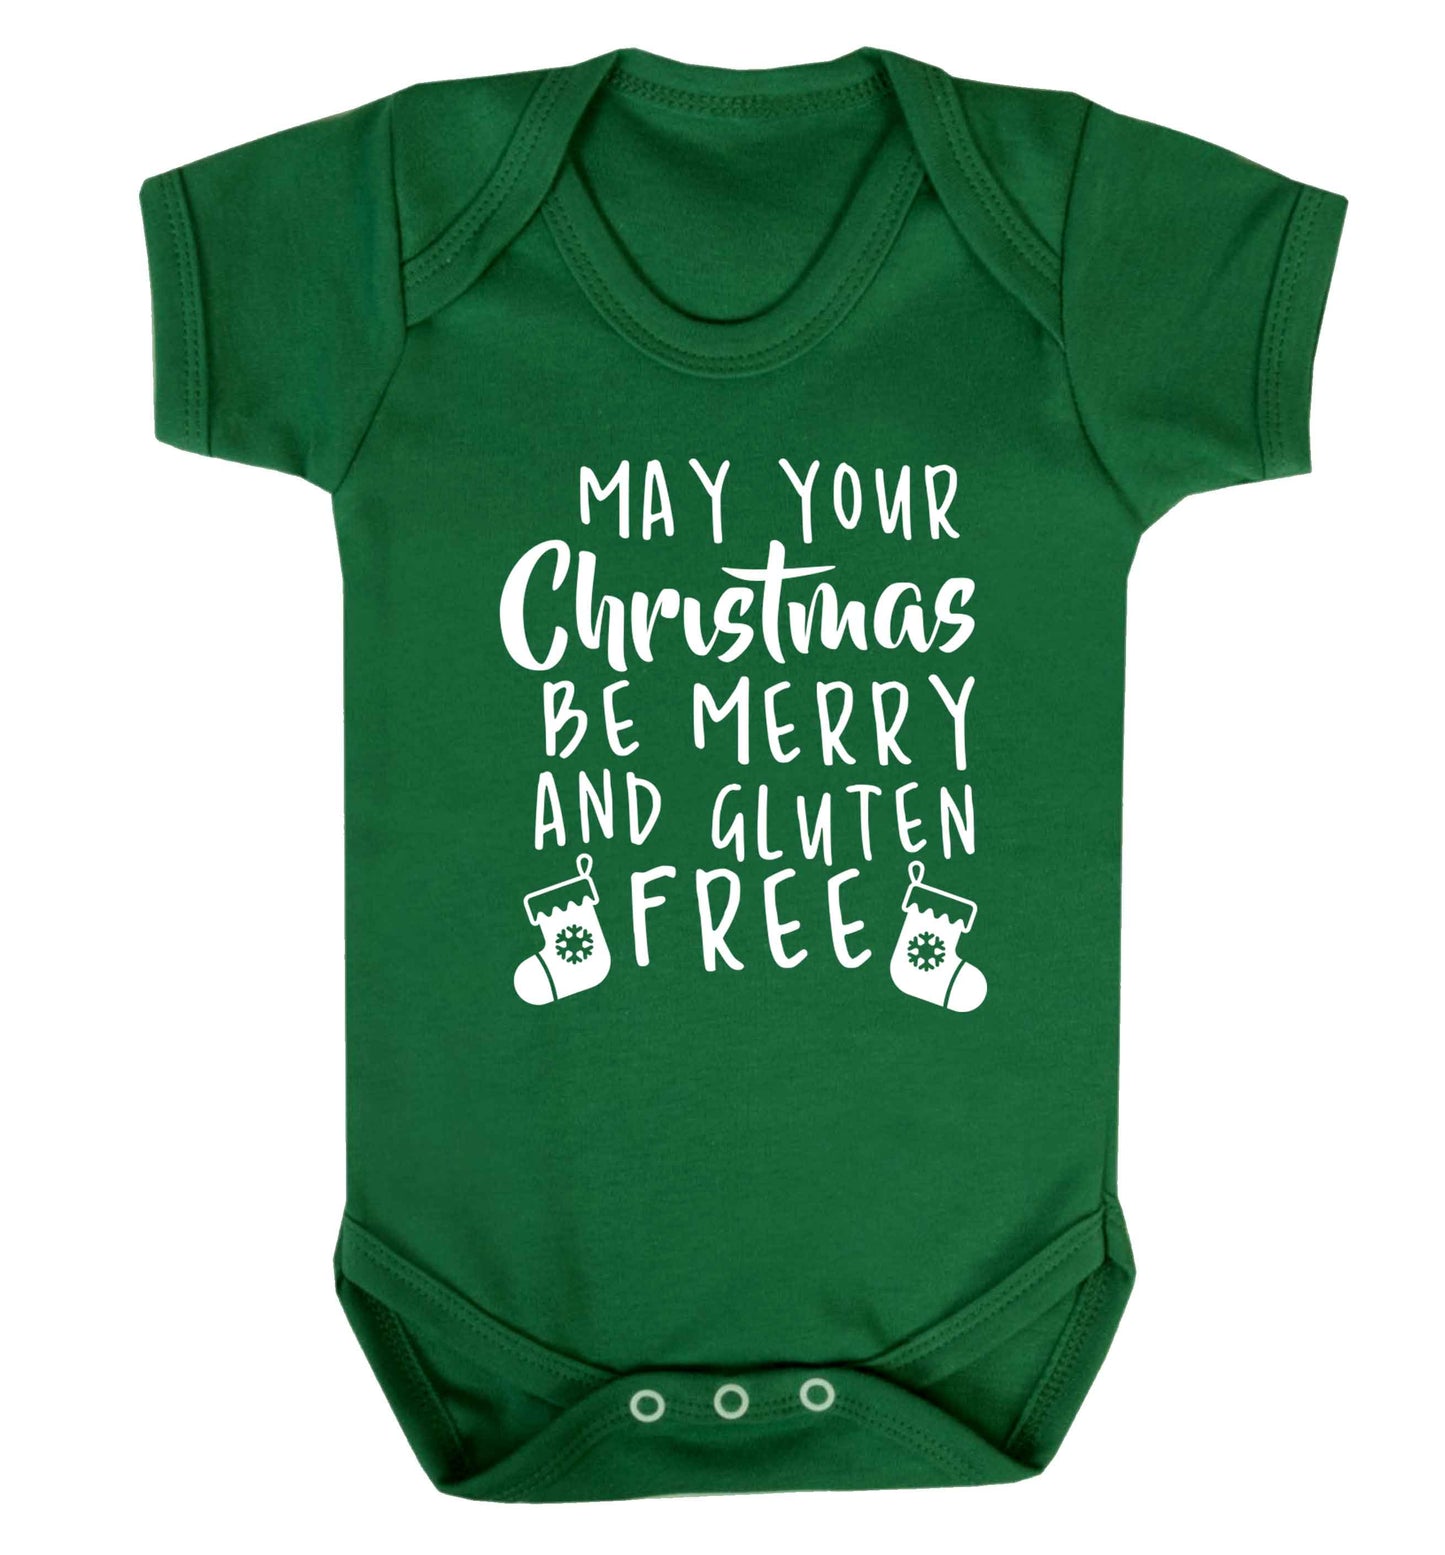 May your Christmas be merry and gluten free Baby Vest green 18-24 months